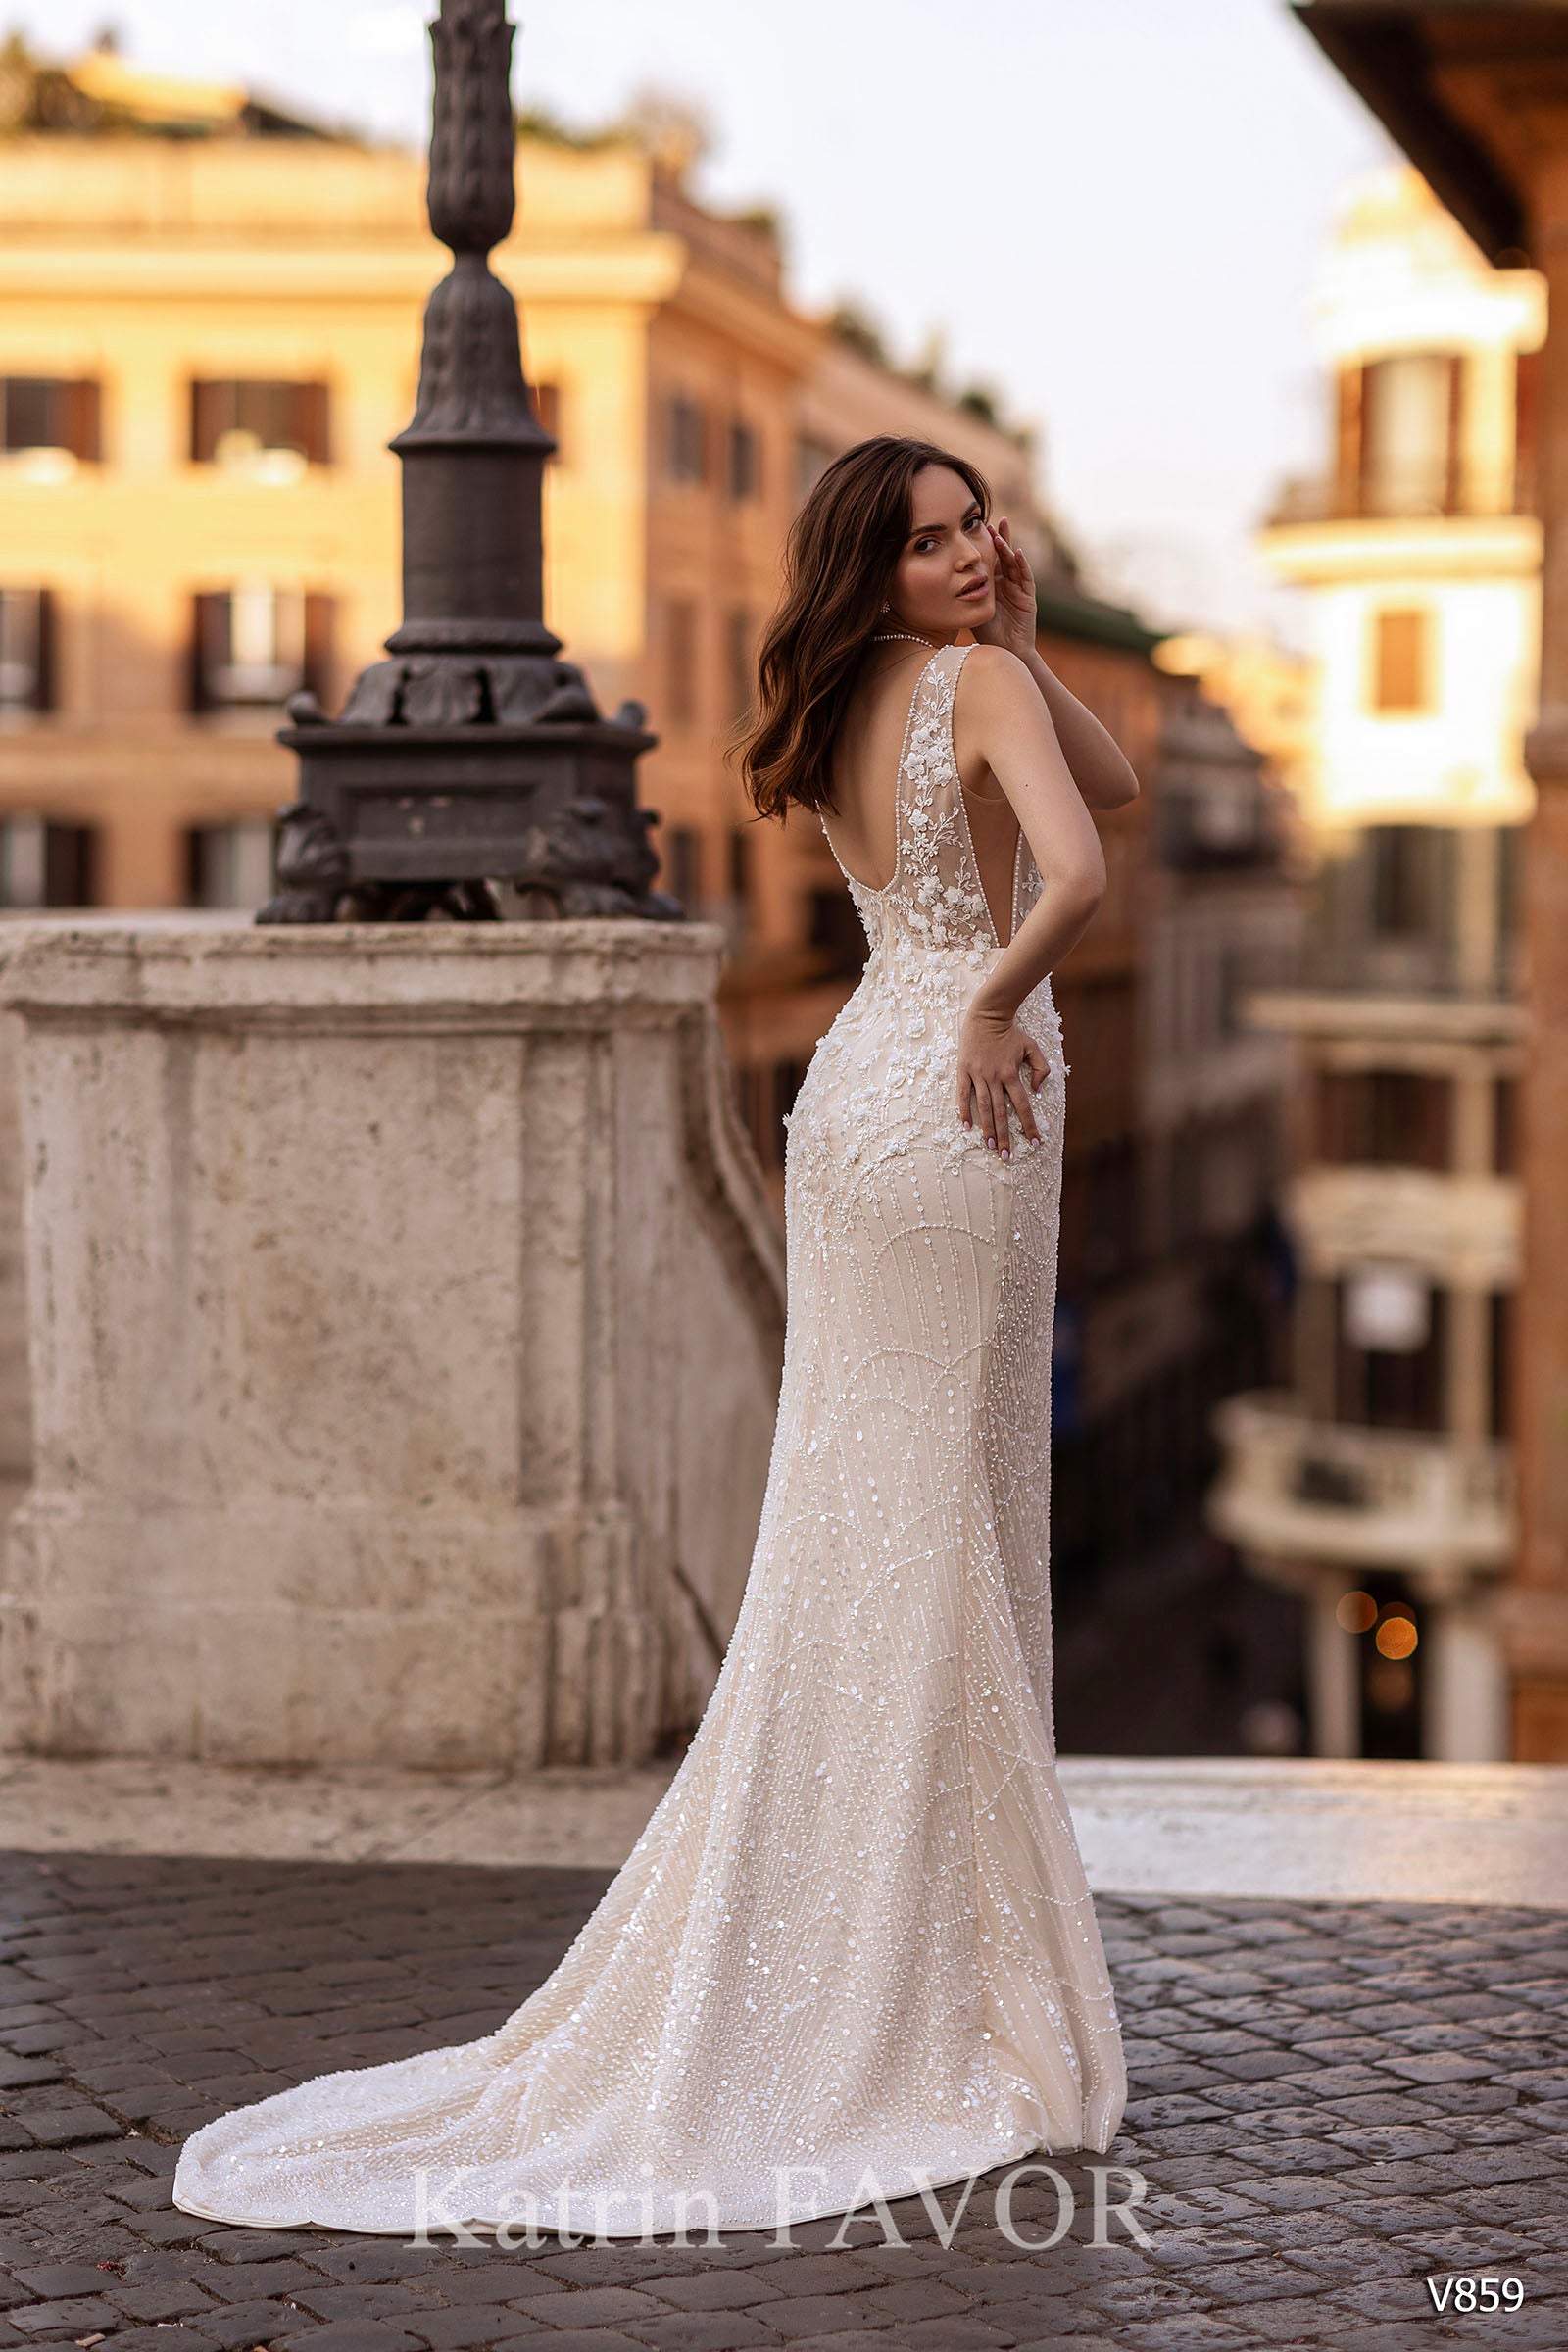 KatrinFAVORboutique-Sheath fitted embroidered wedding dress